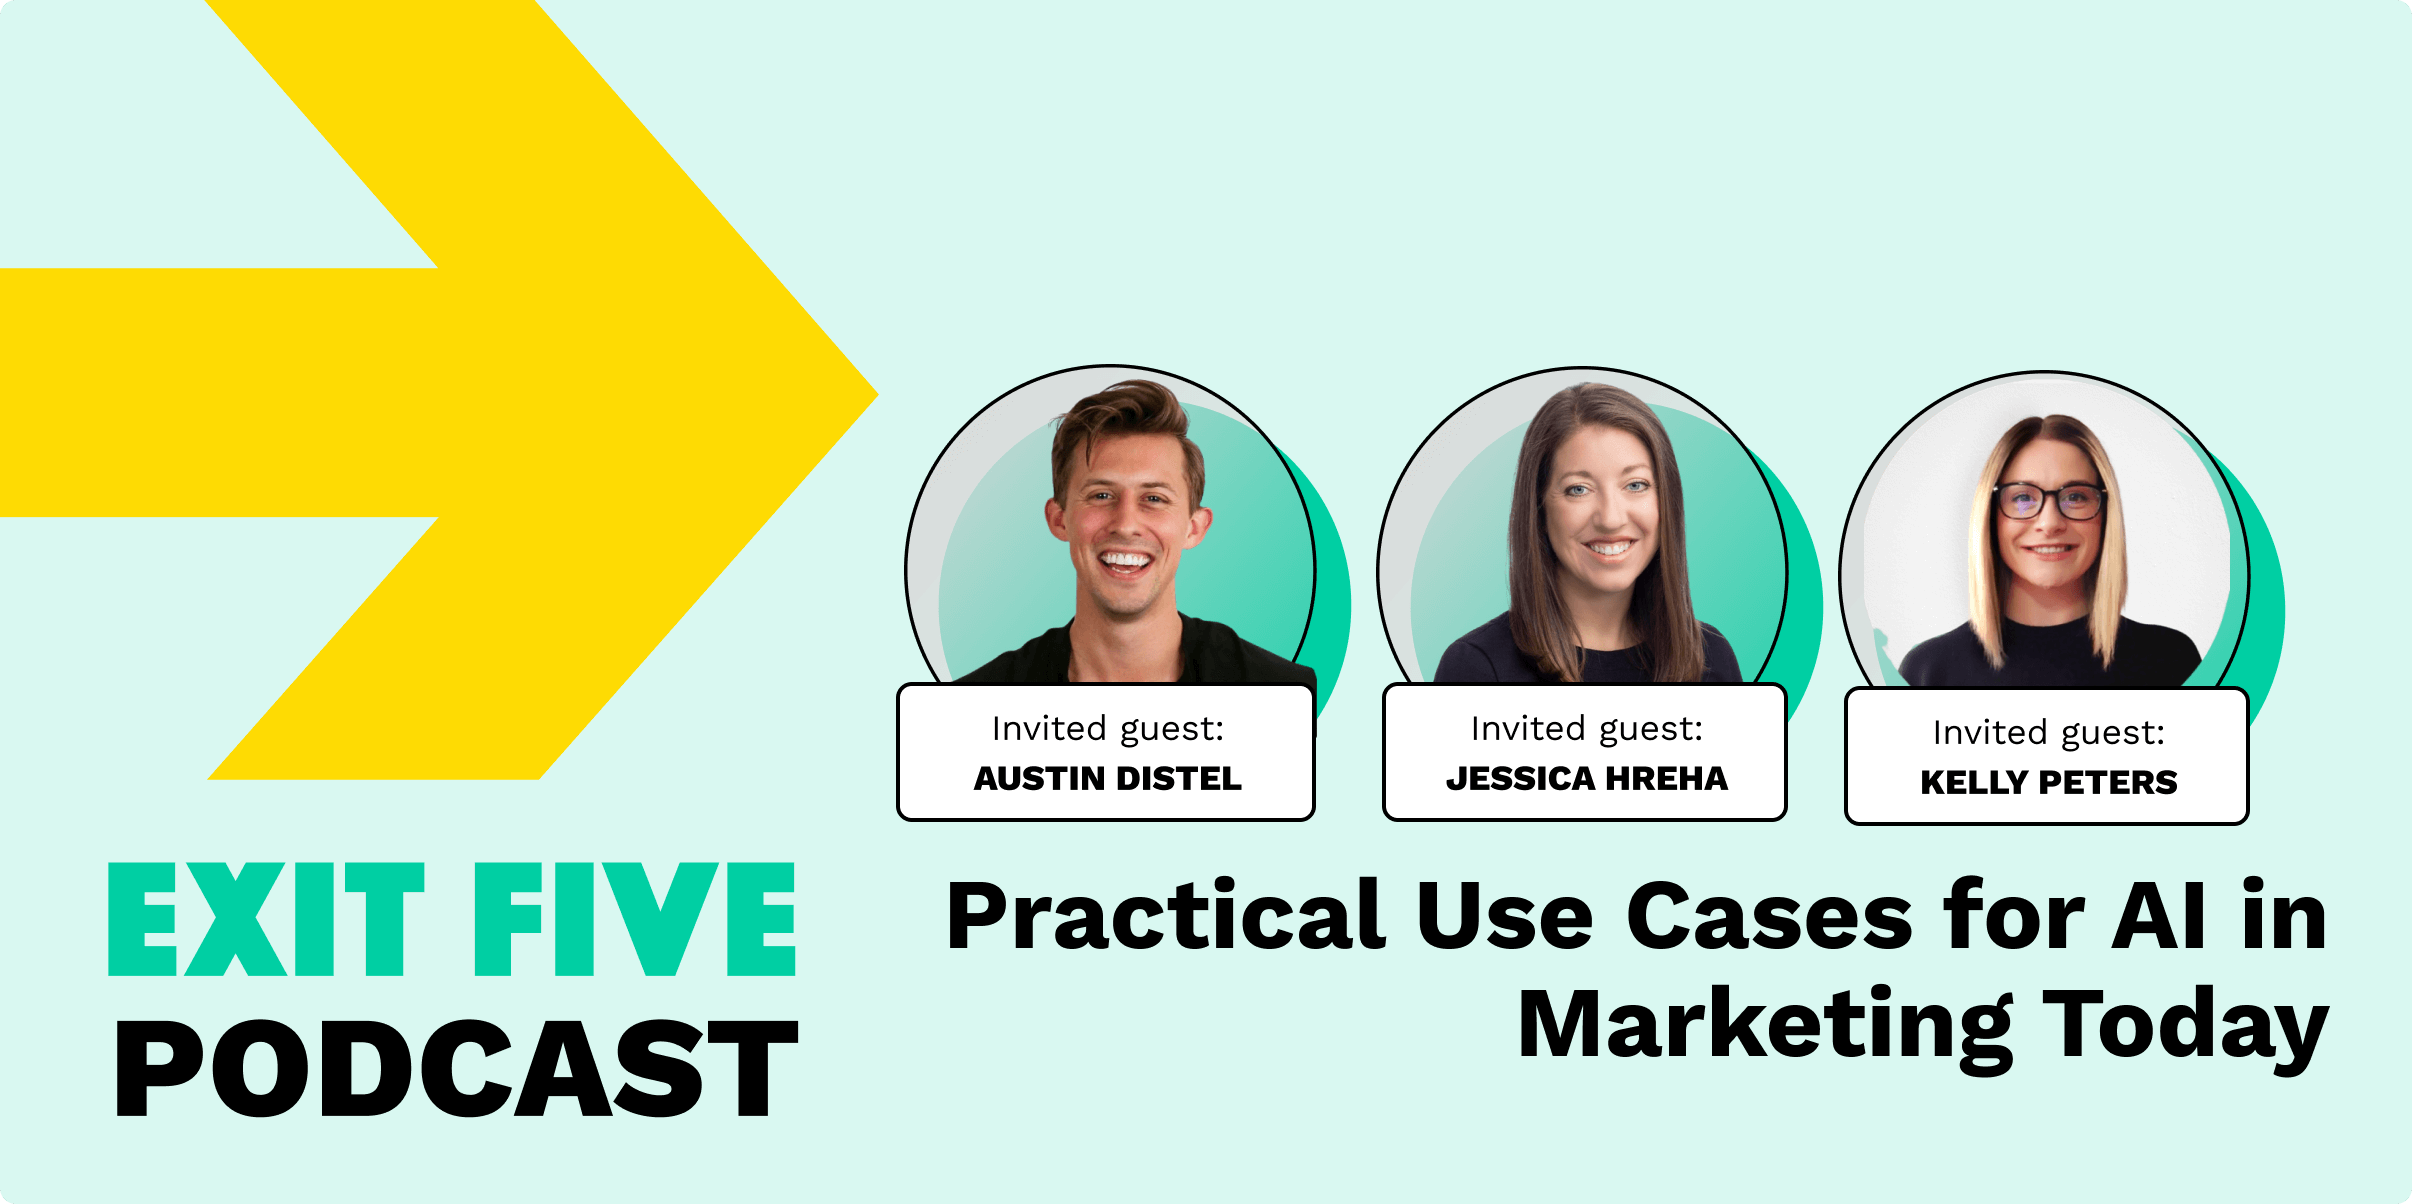 Practical Use Cases for AI in Marketing Today